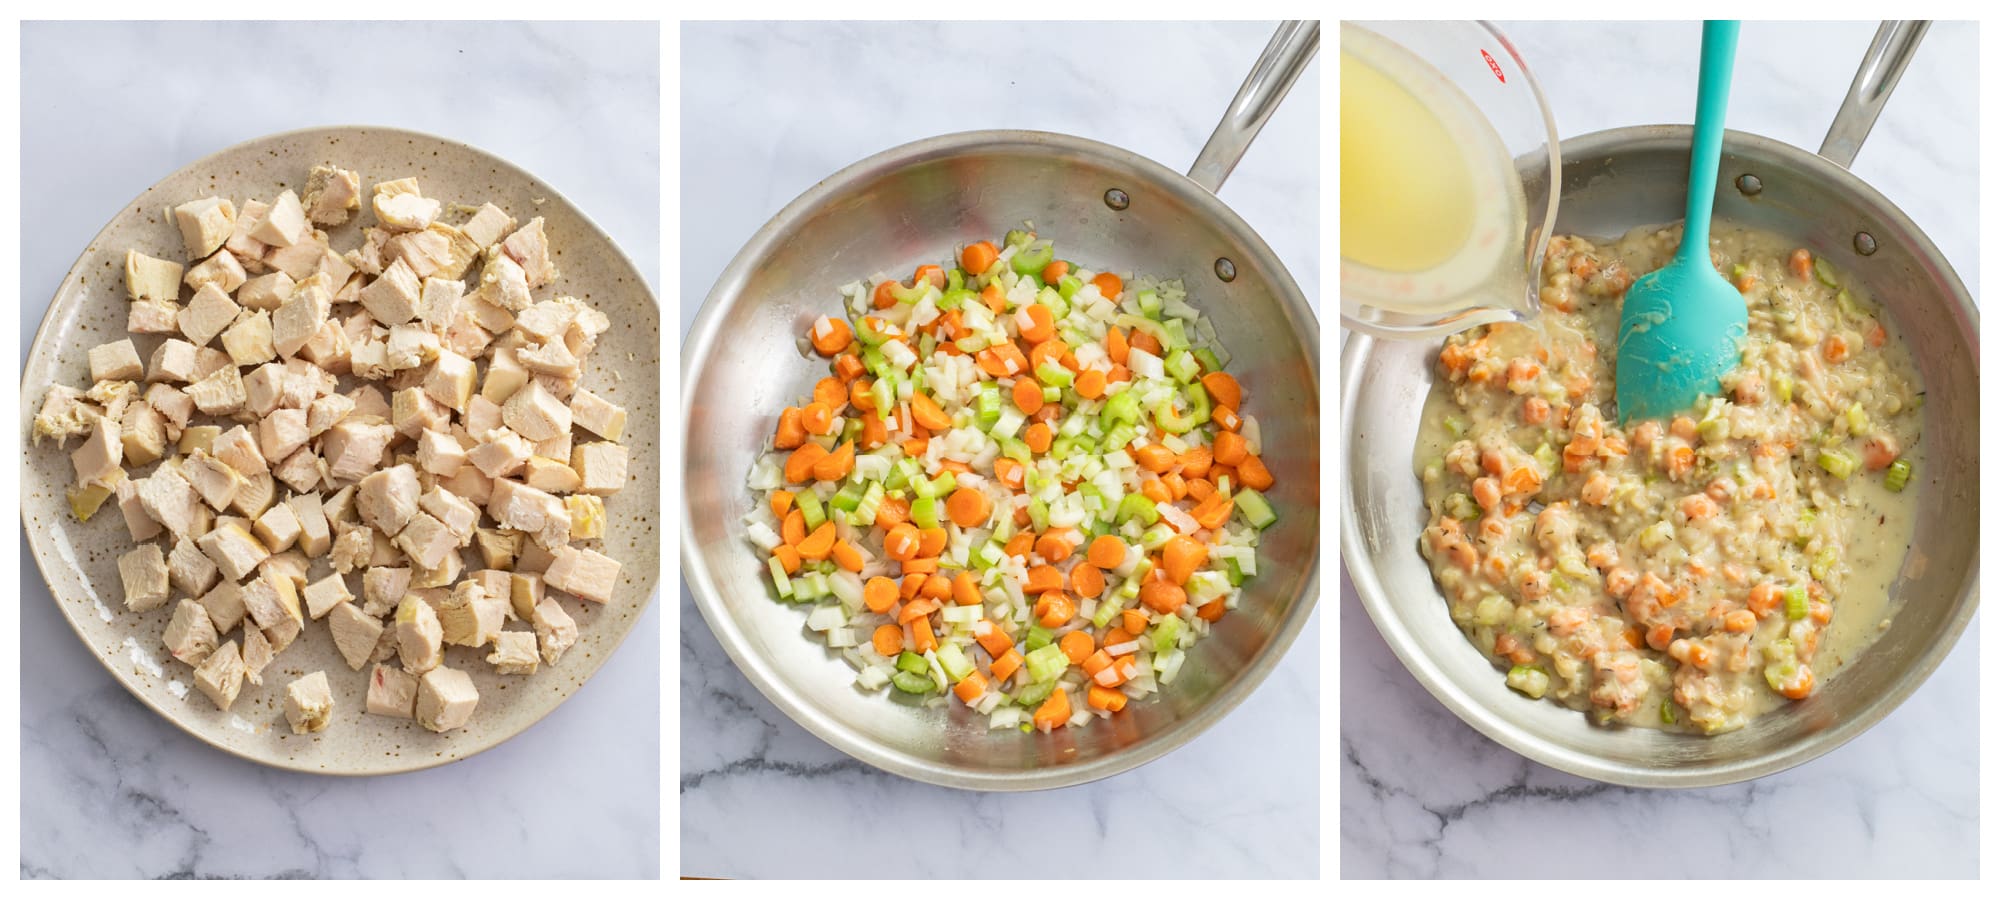 A plate of cooked cubes of chicken next to a skillet of mirepoix with flour and broth being added to make pot pie filling.